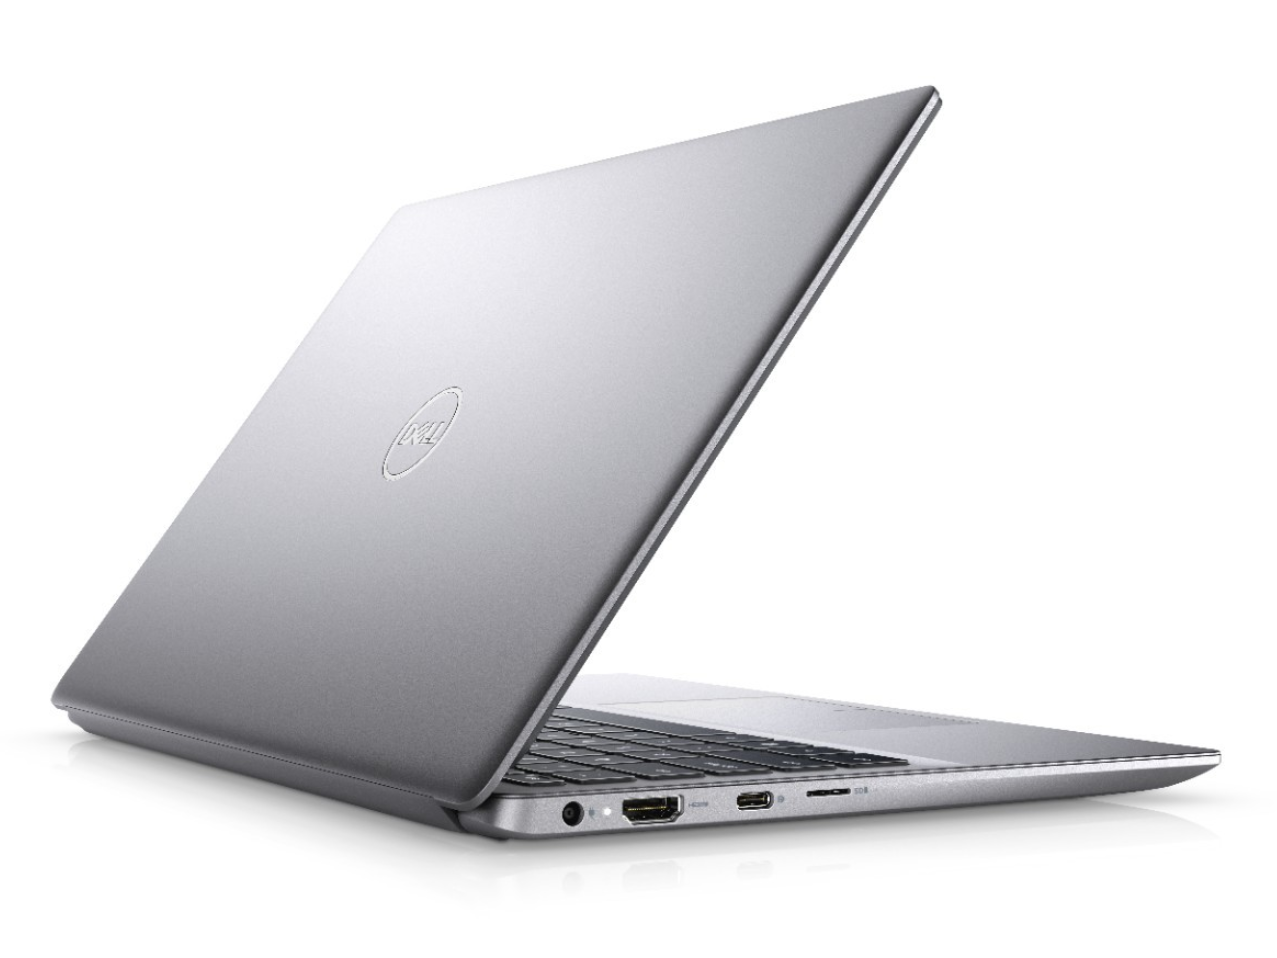 Dell claims upcoming Latitude 3301 will be 